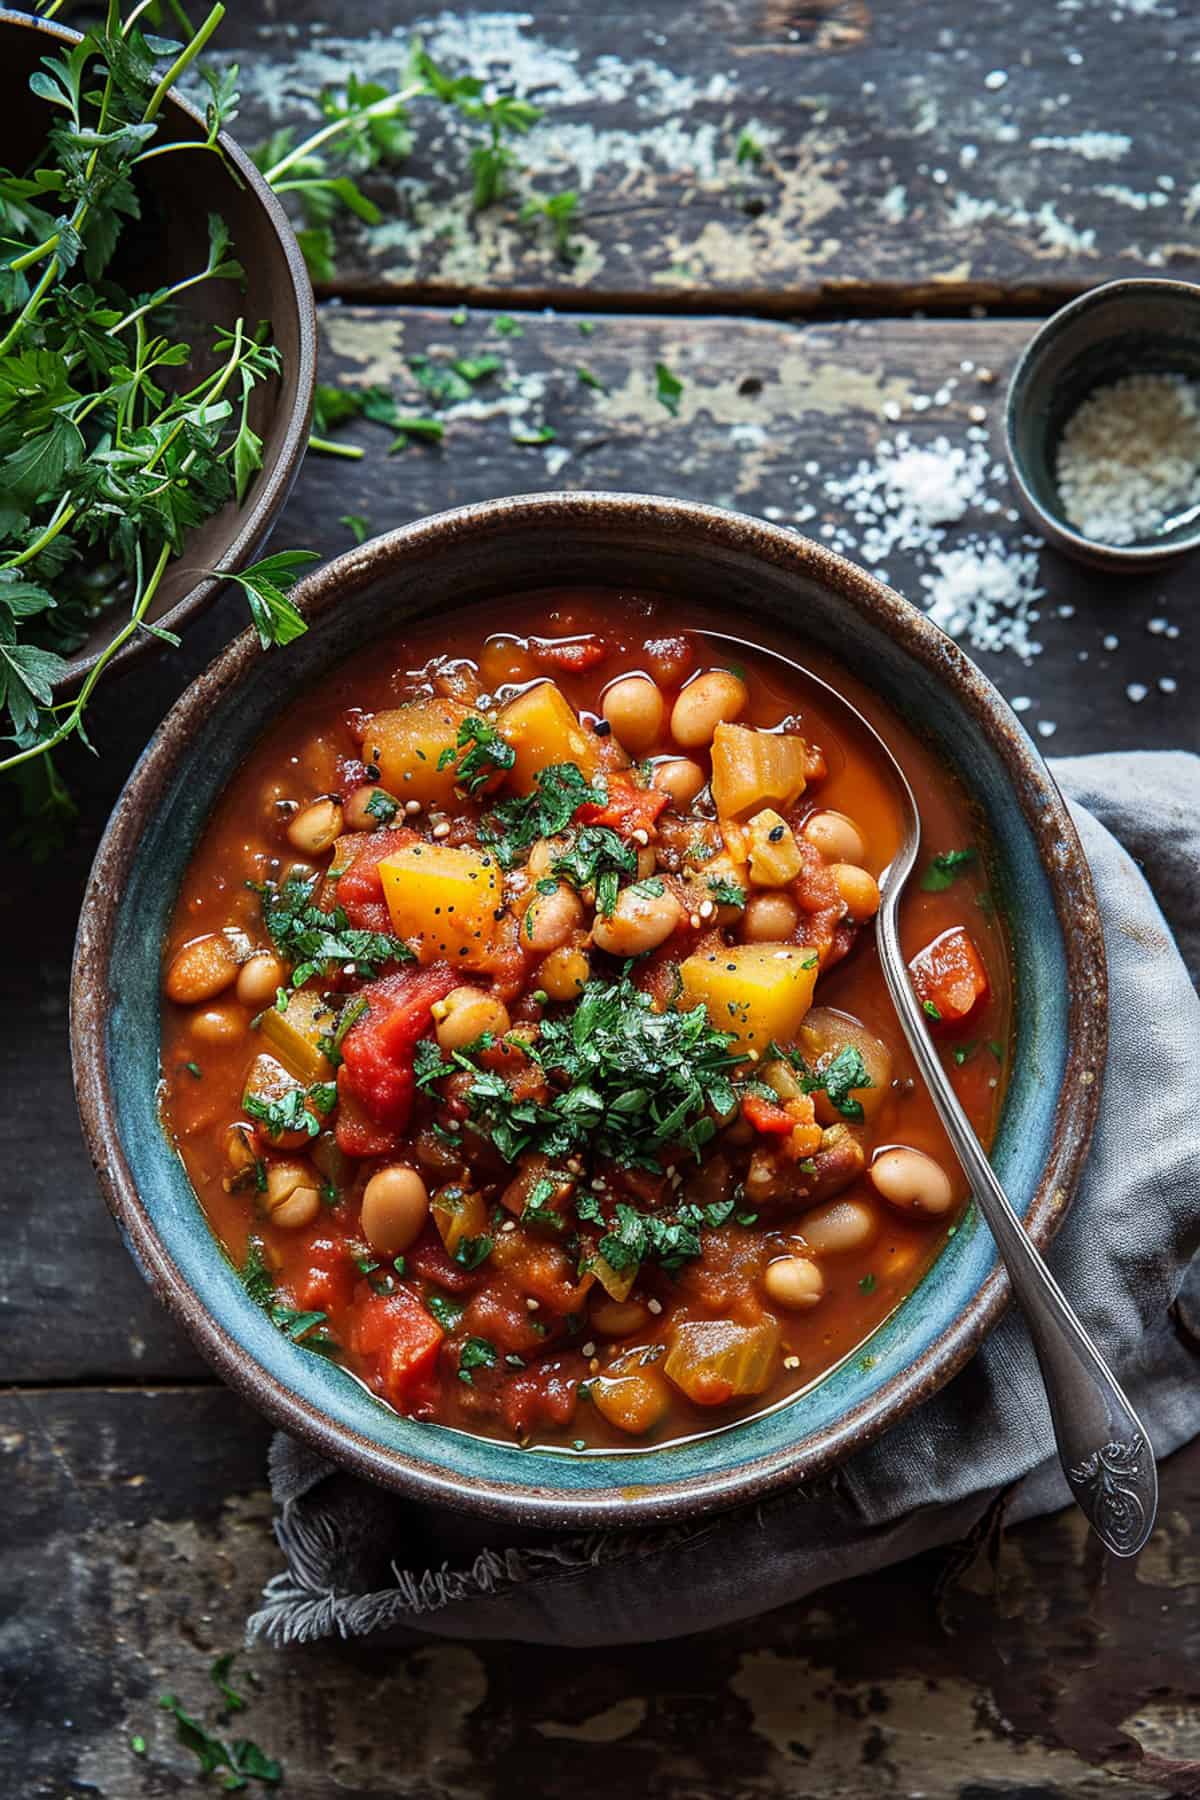 Bean stew with white beans and vegetables in a bowl.